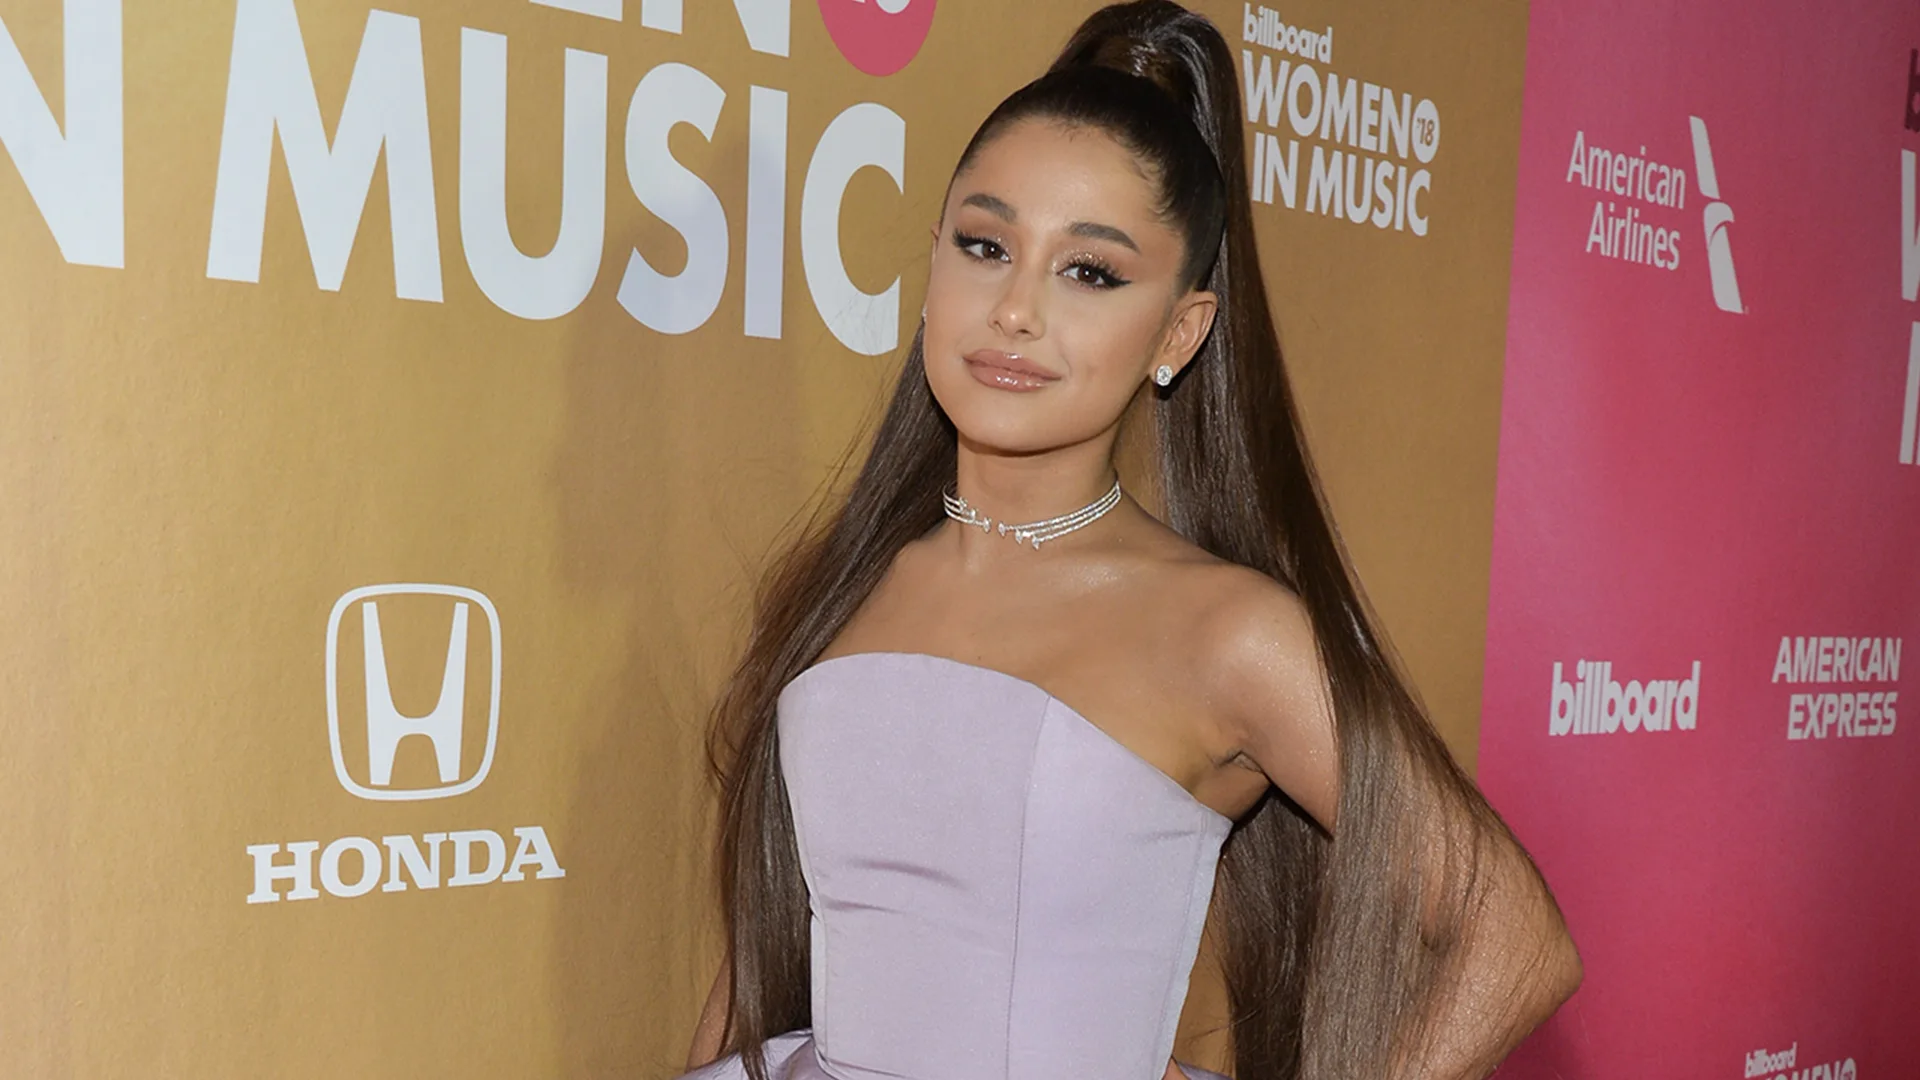 Ariana Grande wearing purple dress at an awards ceremony